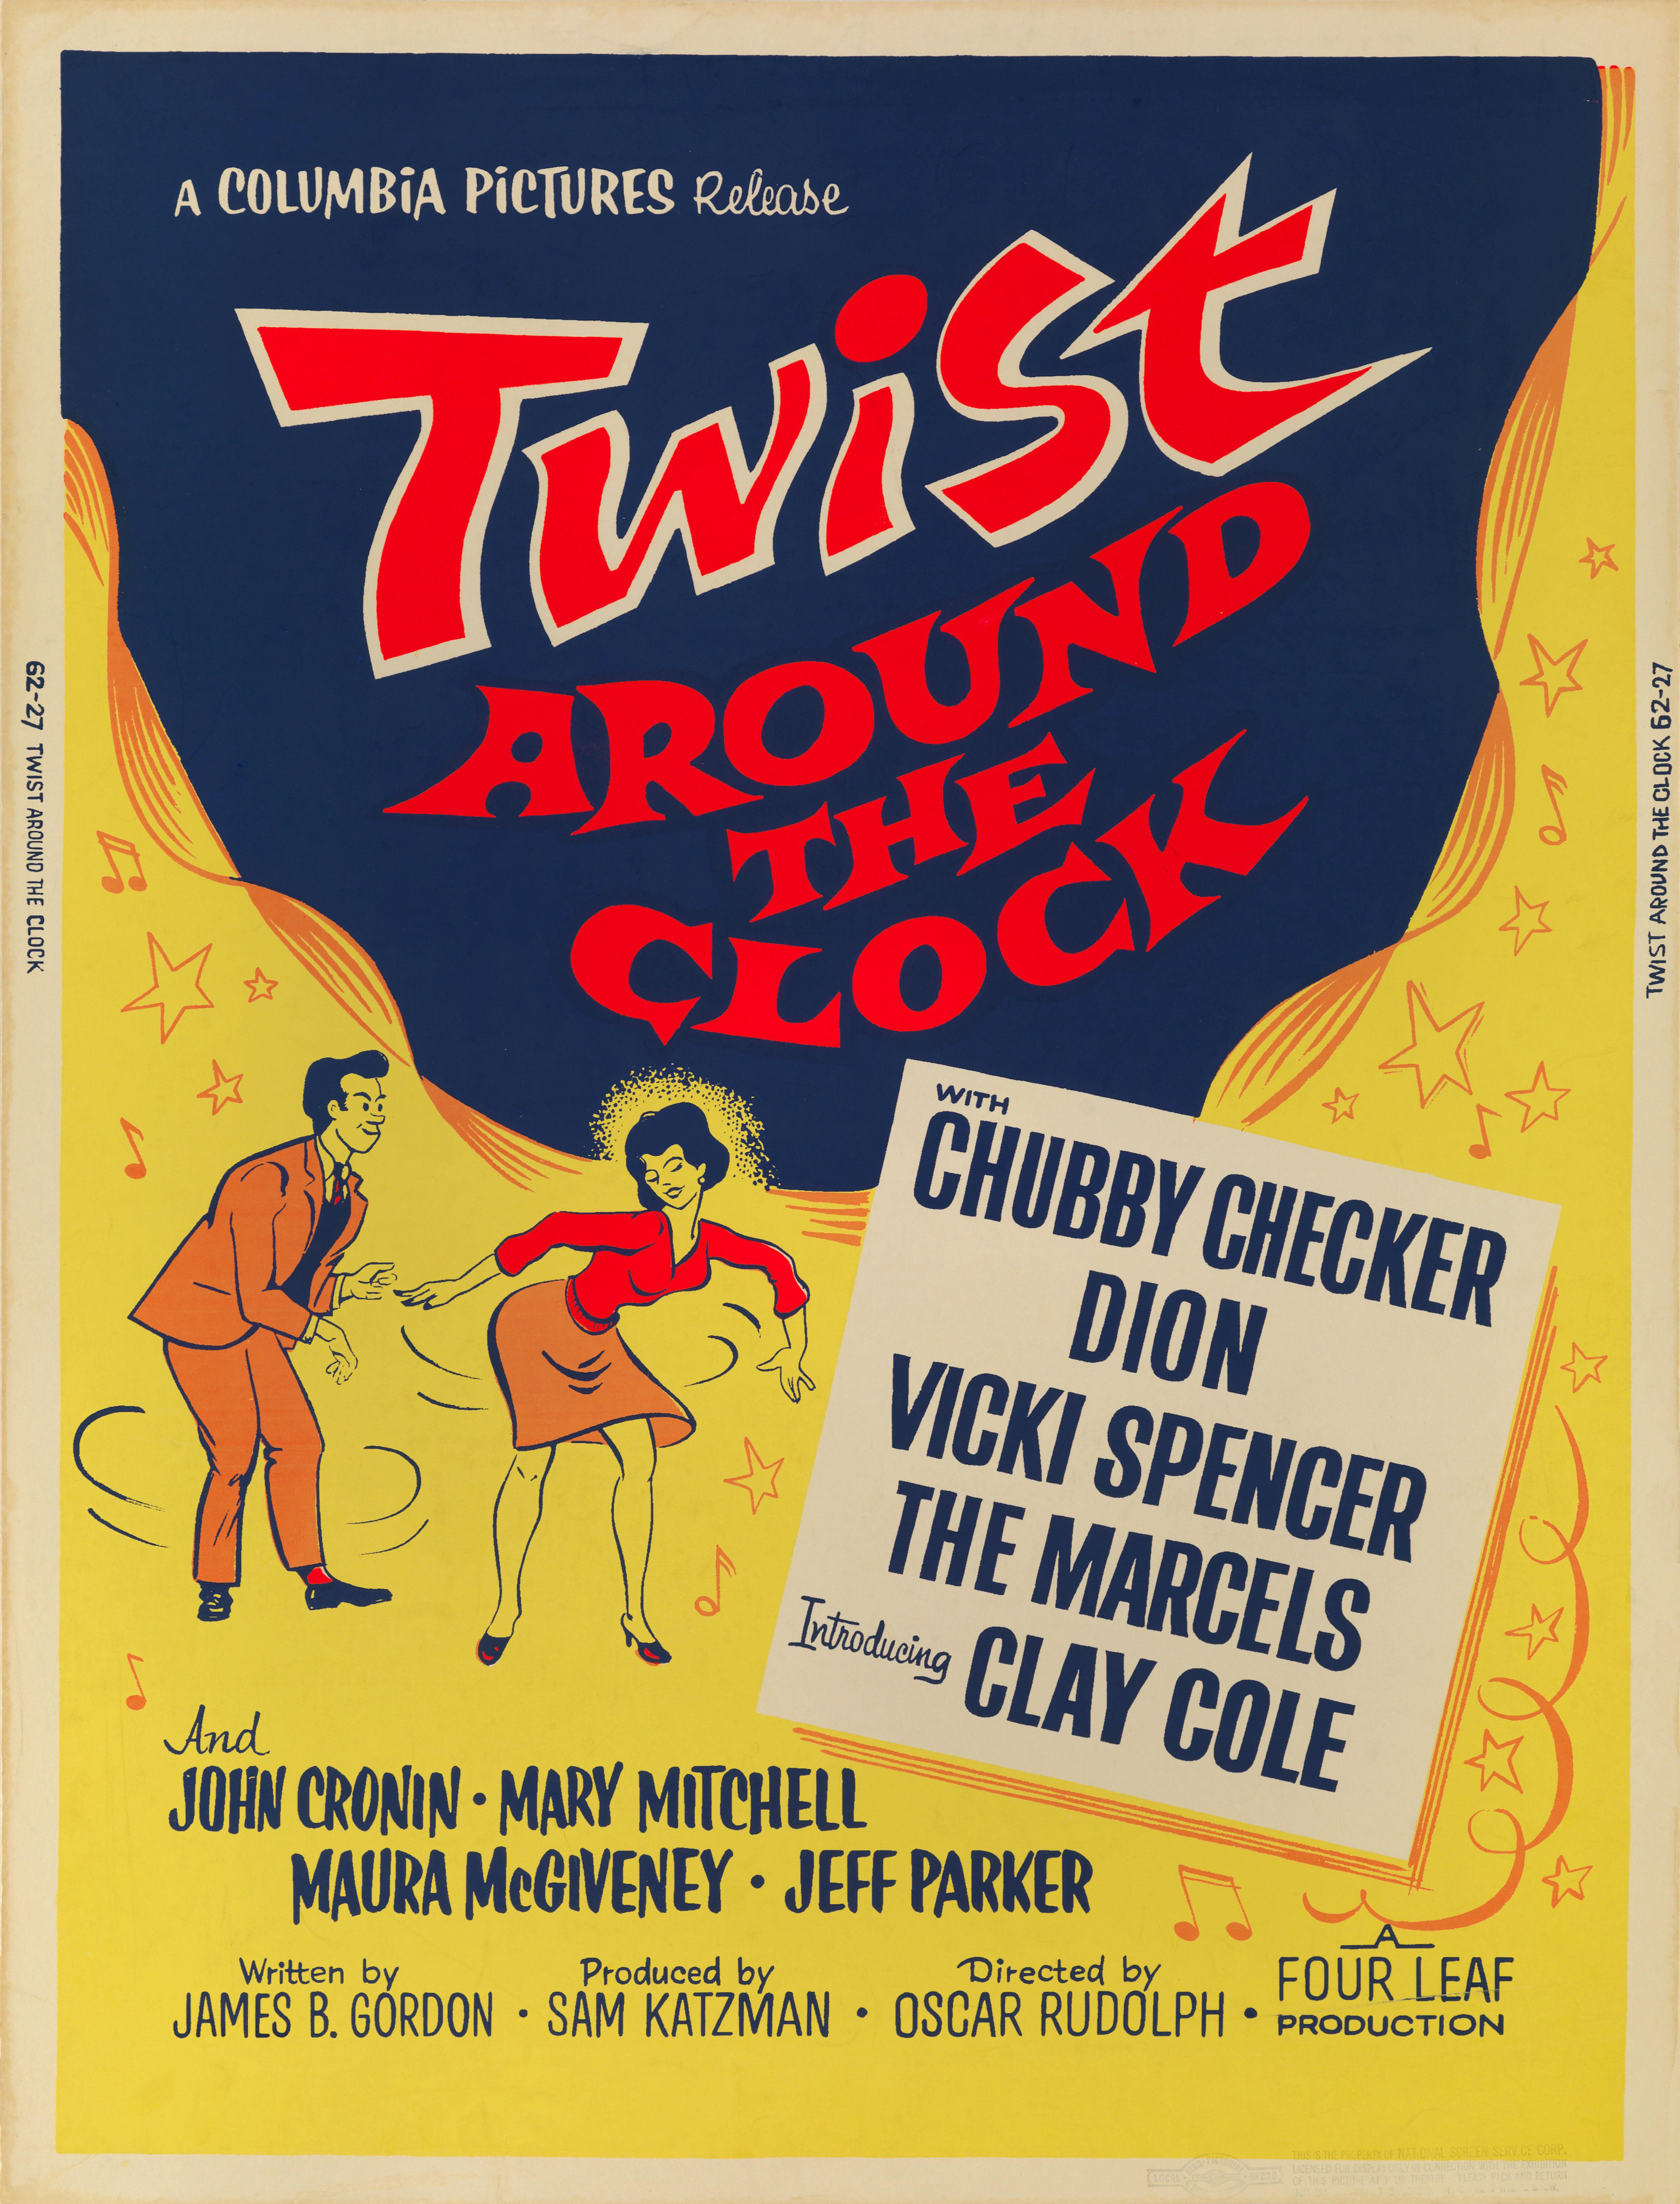 Original US film poster for the 1961 Musical Twist Around the Clock.
This film was directed by Oscar Rudolph and starred Chubby Checker.
This size poster was printed on heavier paper stock, and designed for special displays and drive-in cinemas.